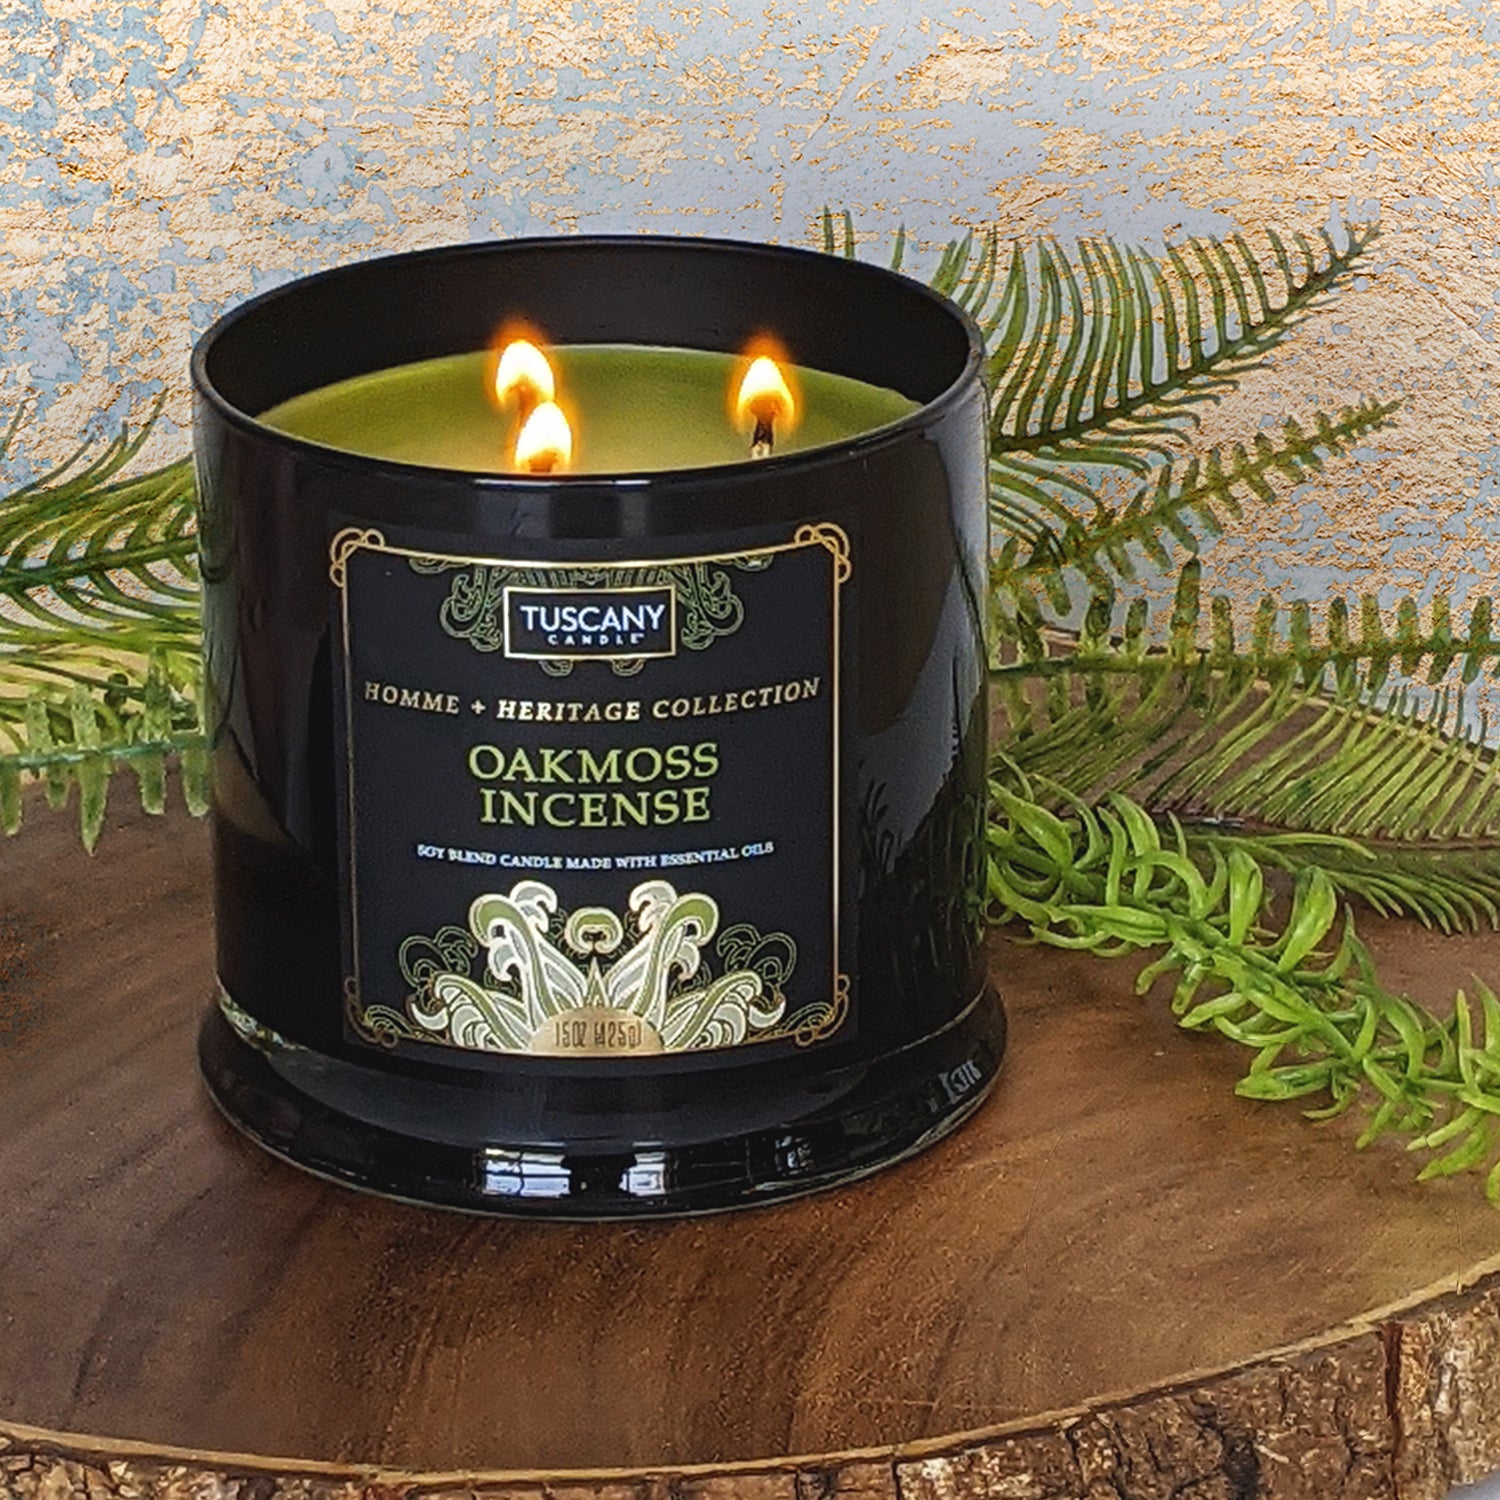 Oakmoss Incense, a rustic, manly scented candle from Tuscany Candle